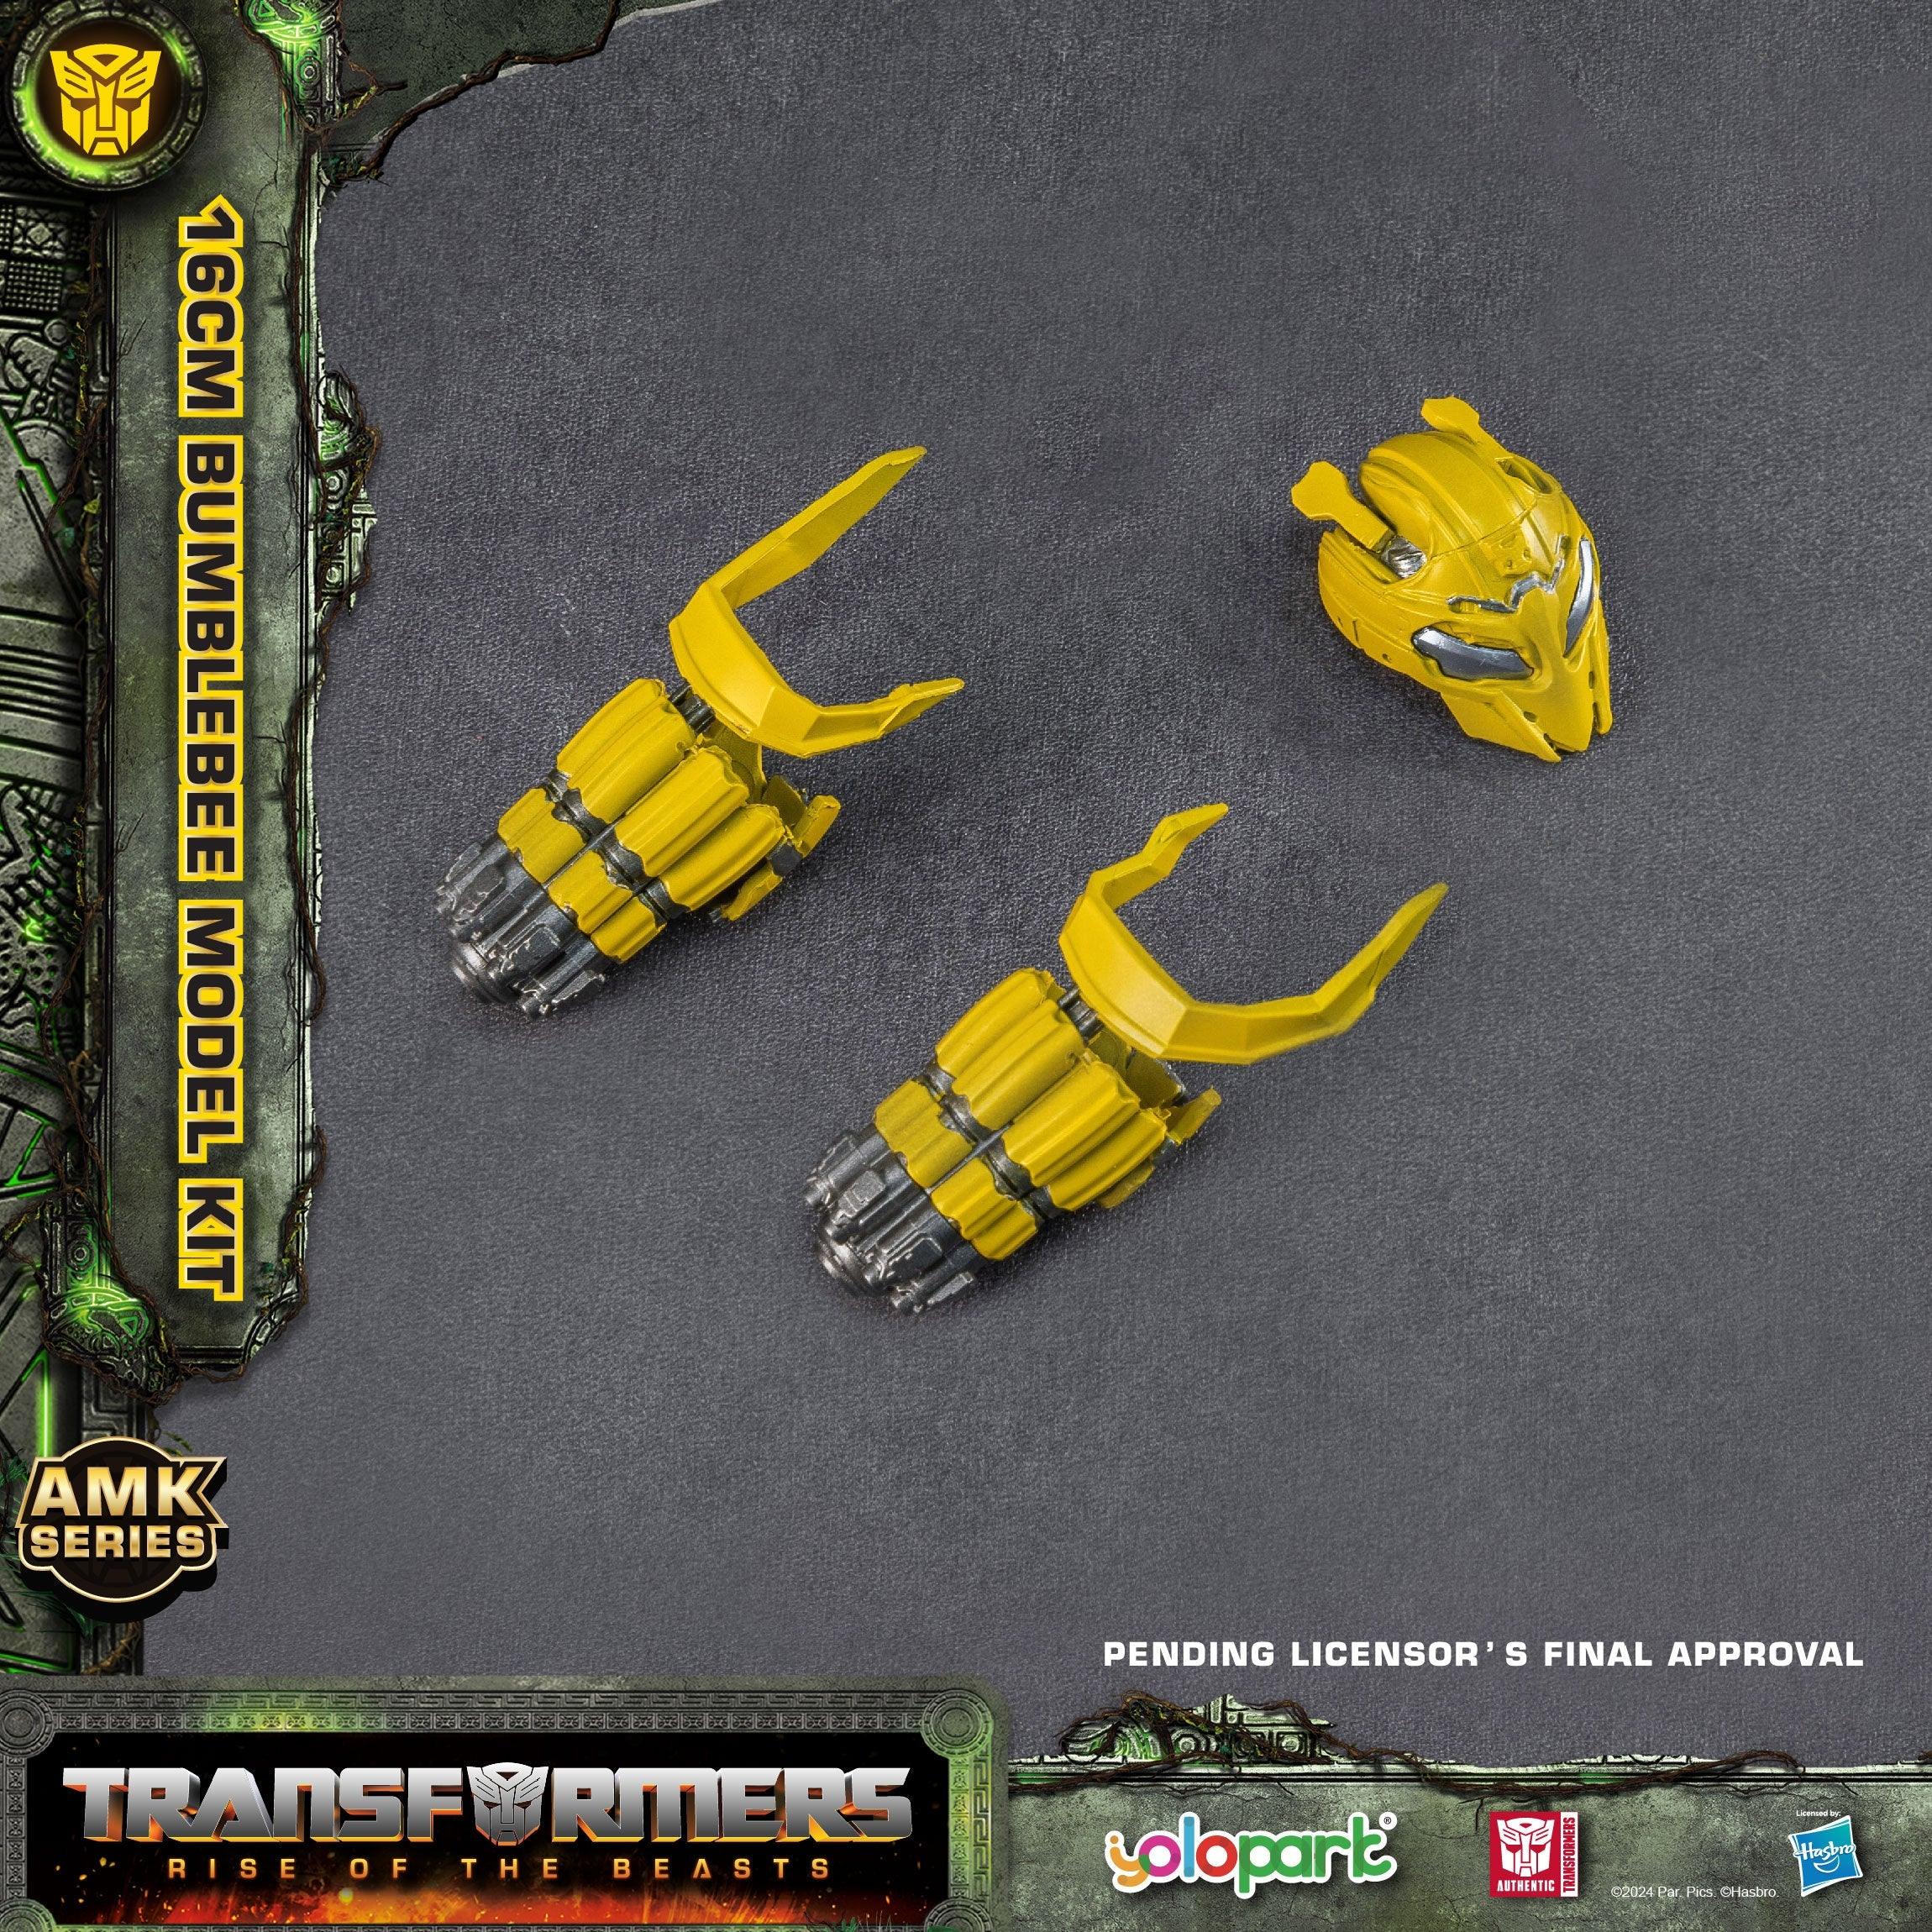 Transformers: Rise of the Beasts - 16cm Bumblebee Model Kit - AMK Series - Yolopark